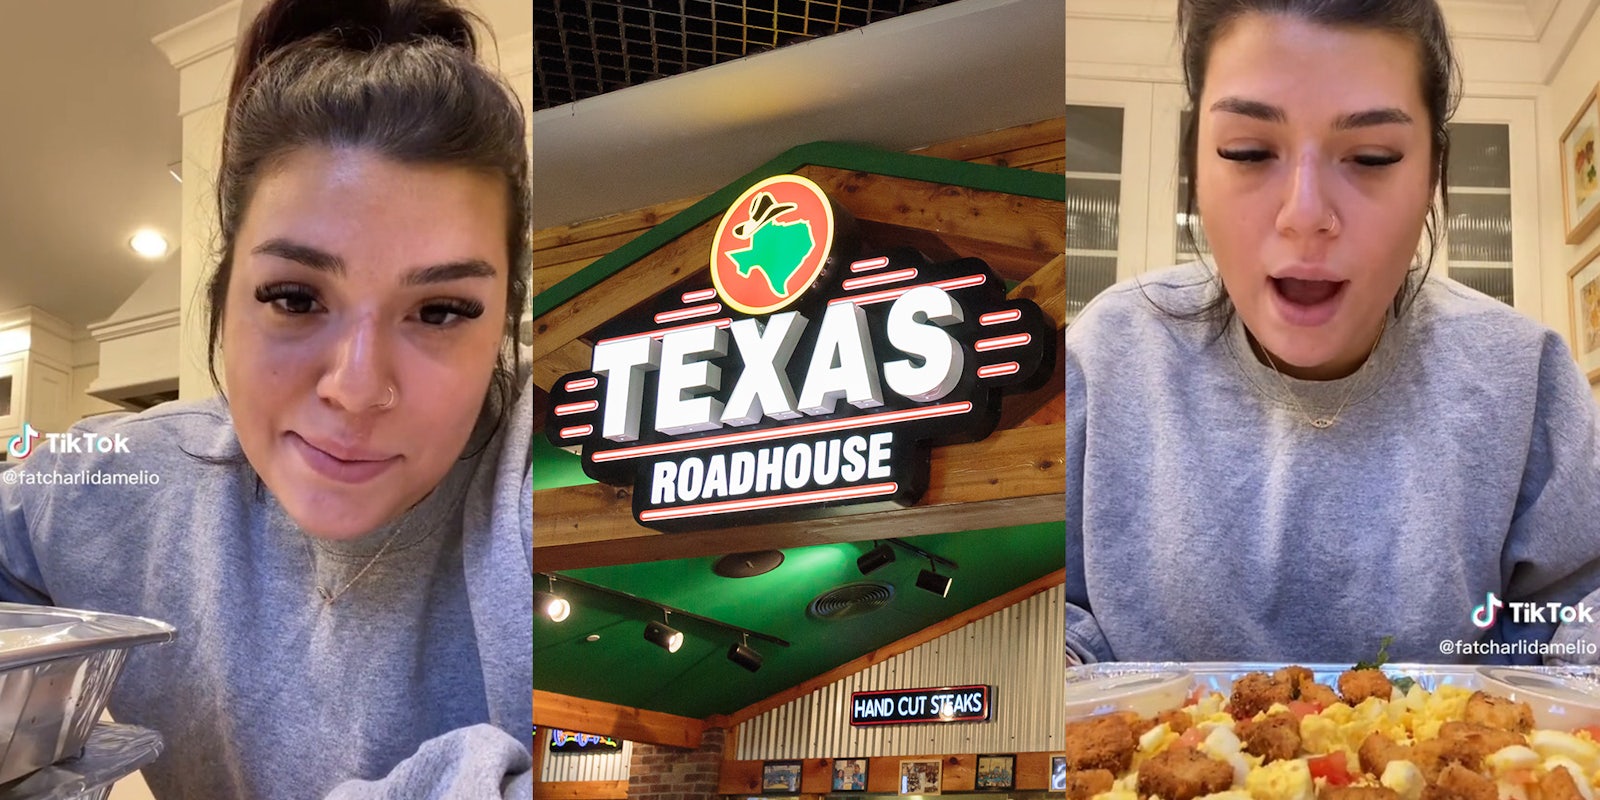 Women explains and shows off her Texas Roadhouse meal prep hack